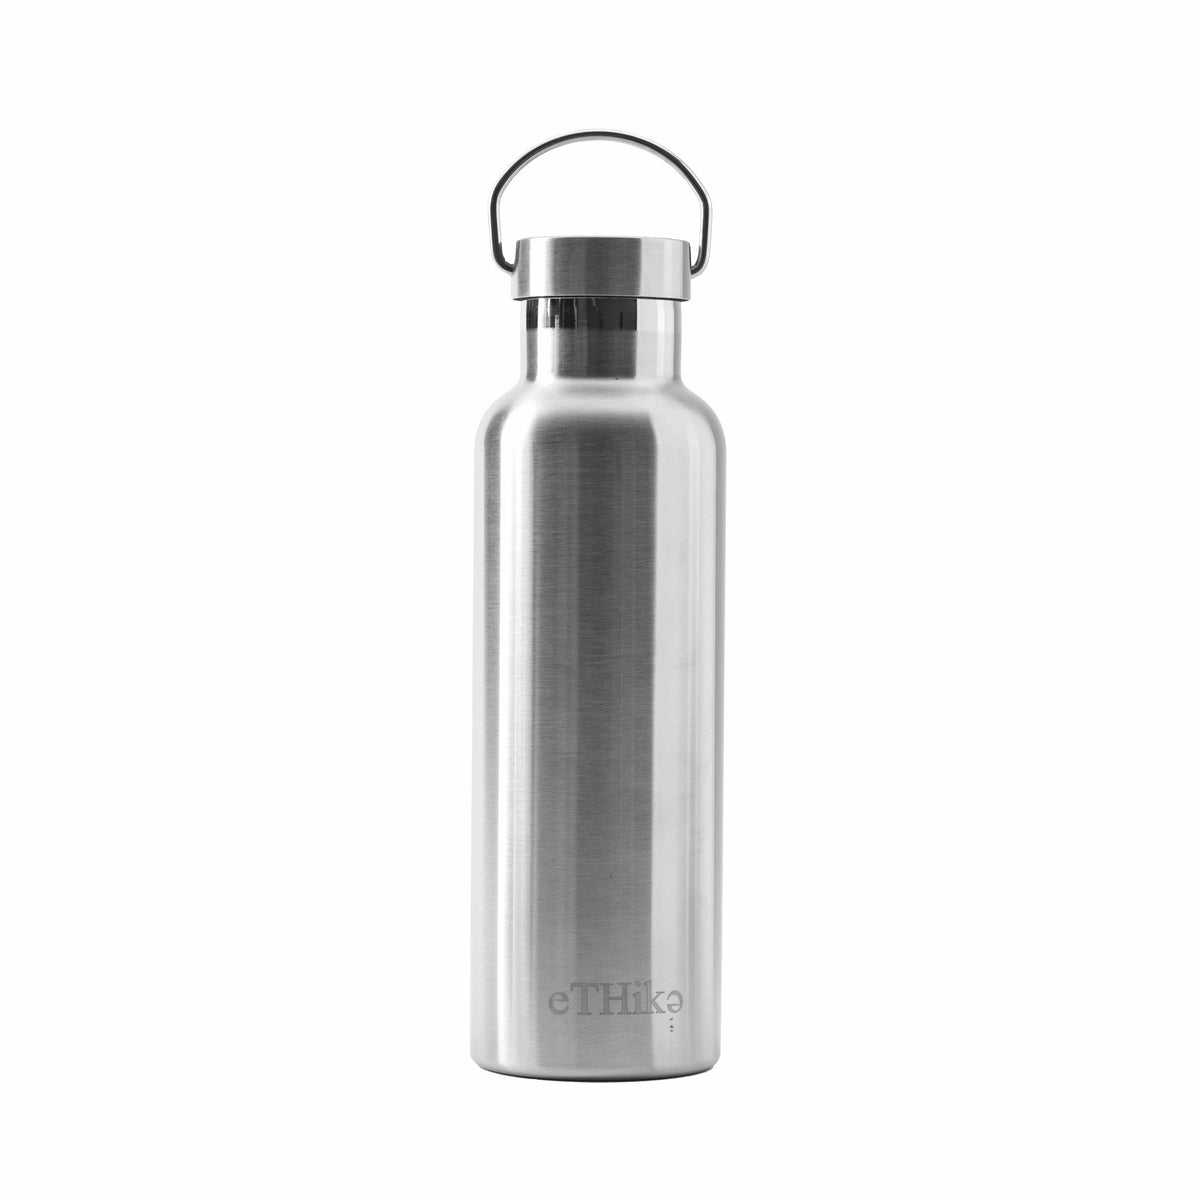 Ethika_Inc Stainless Steel Stainless Steel Double-Walled Water Bottle in 350ml, 500ml, 600ml, 750ml, and 1000ml sizes: Eco-friendly and versatile with a leak-proof steel lid. Expertly insulated to keep drinks cold for 24 hours or hot for 12. Designed with a silicone seal, it's dishwasher-safe and compatible with carbonated beverages. Stylish color options available. Ensures no metal aftertaste or harmful chemicals. Perfect for health-conscious and sustainability enthusiasts. #StayHydratedInStyle.